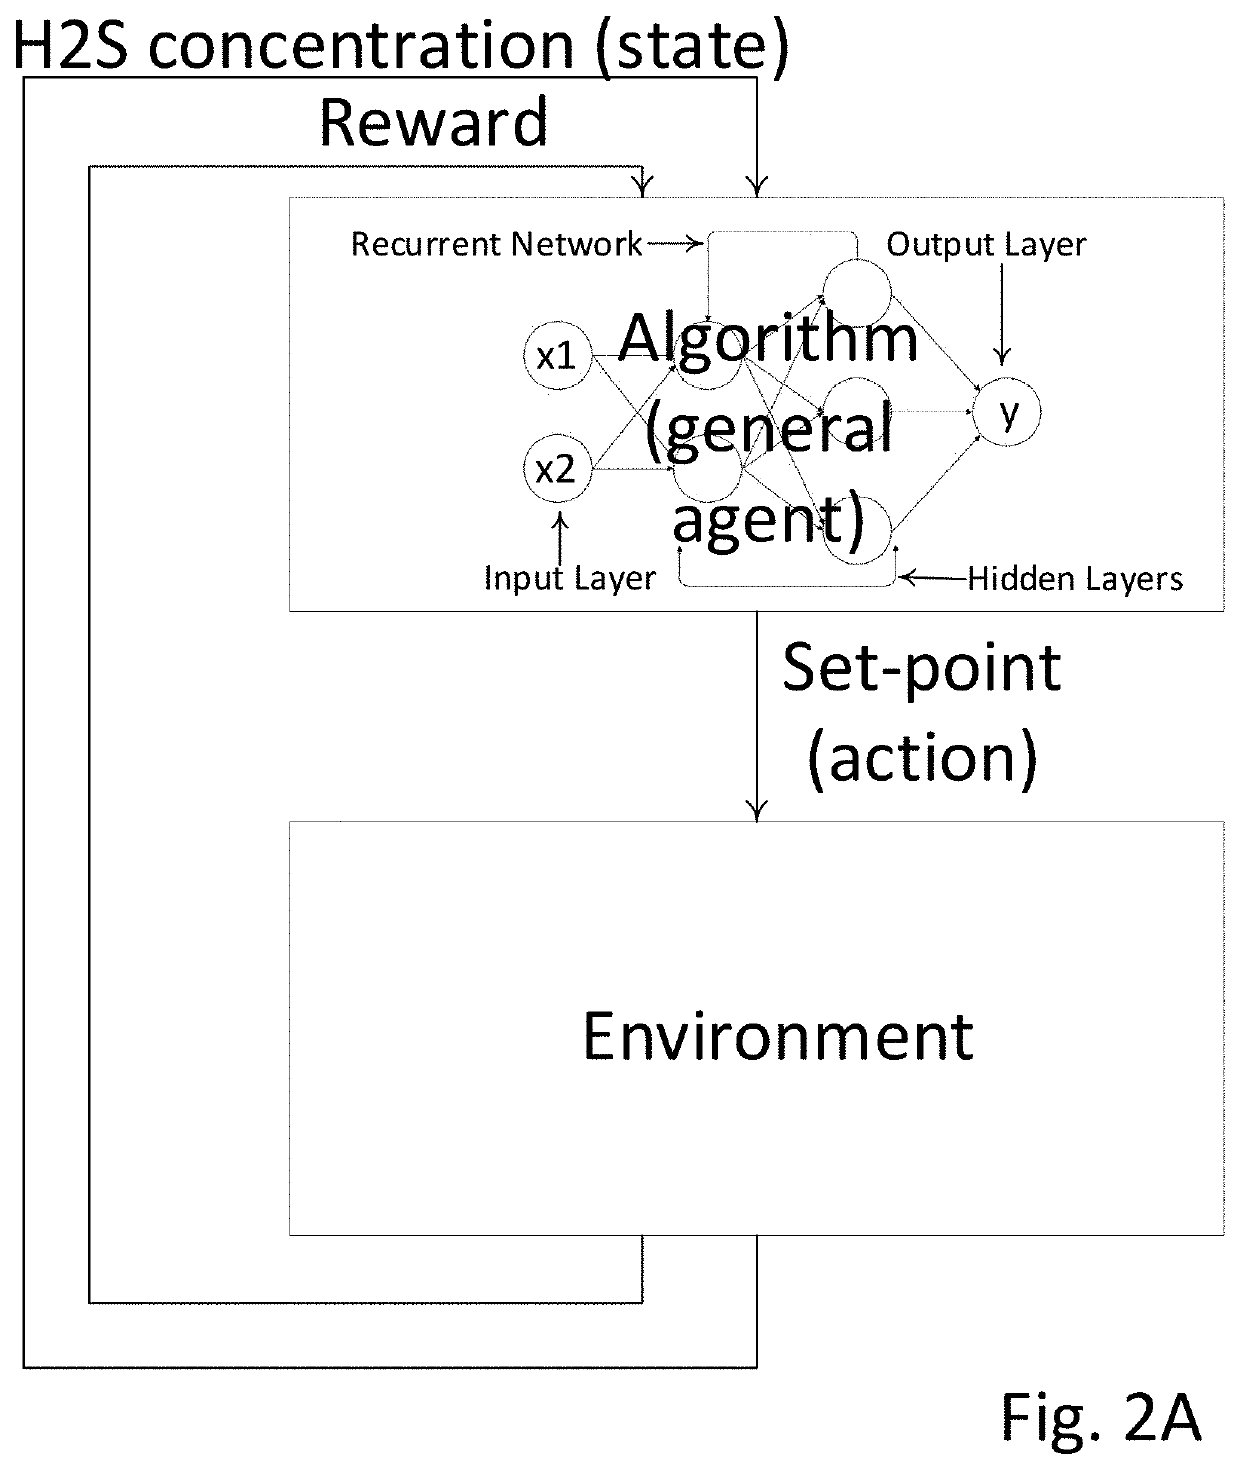 Reinforcement learning for h2s abatement